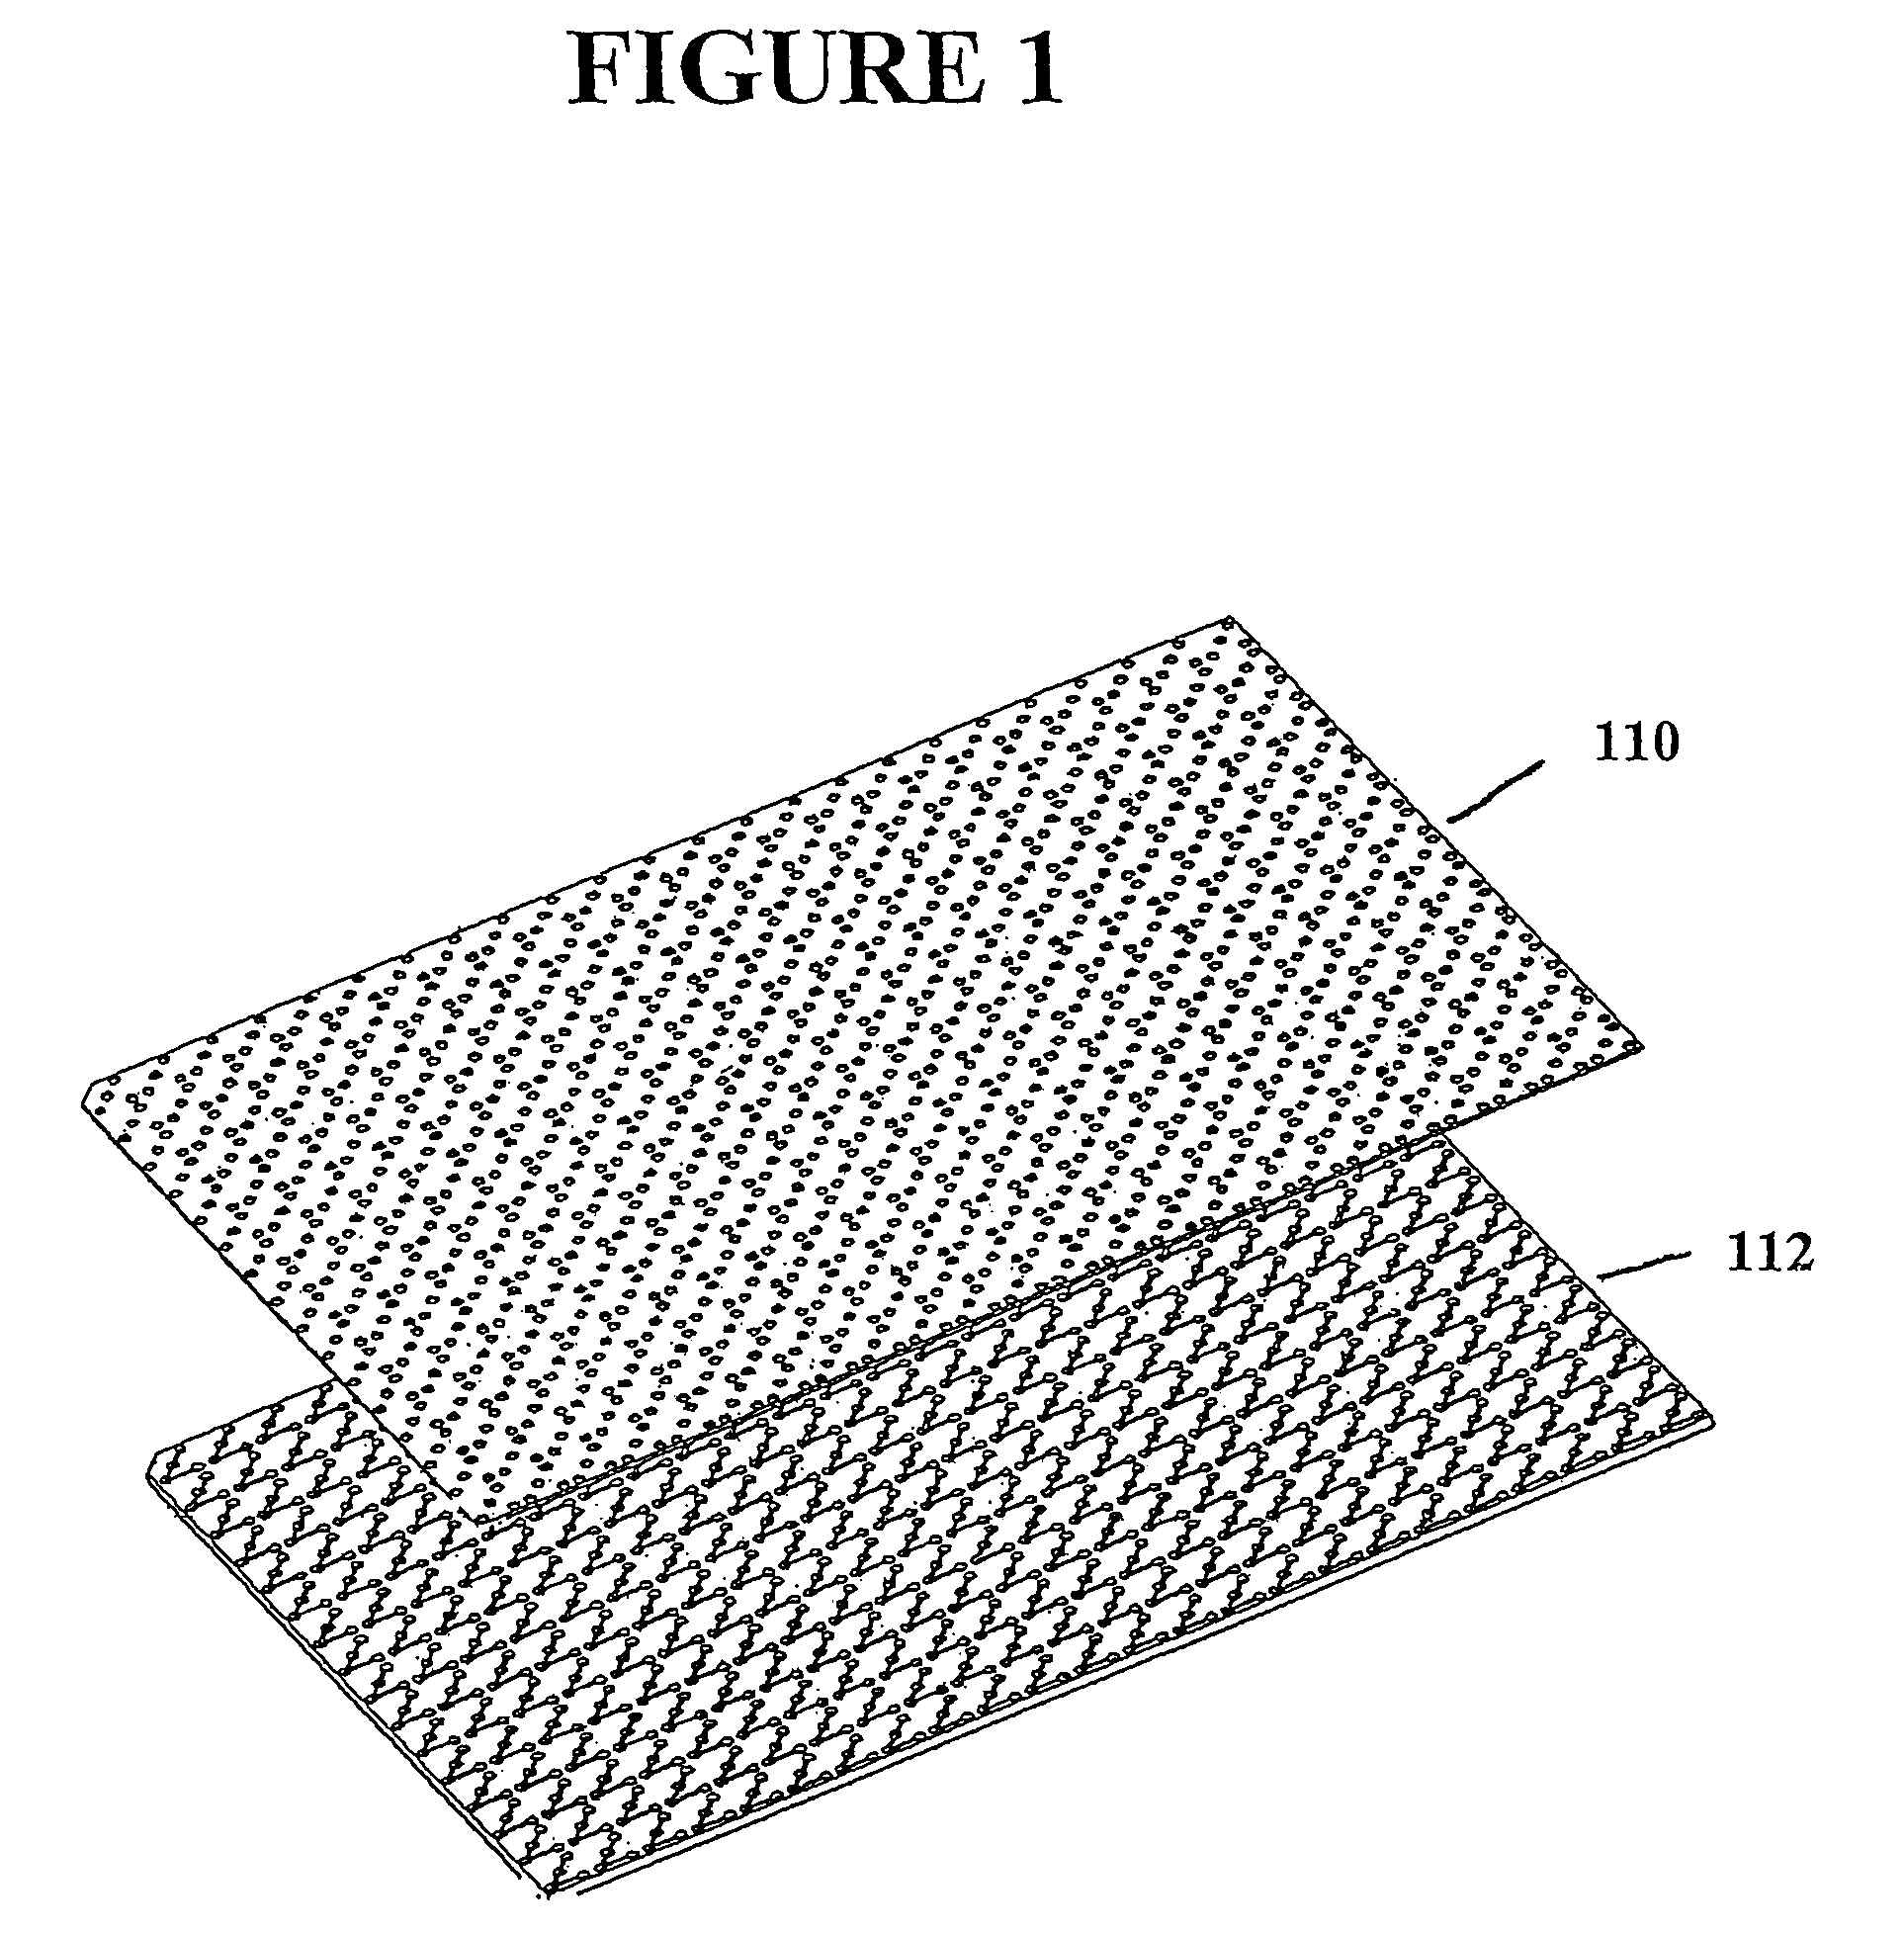 Microstructure apparatus and method for separating differently charged molecules using an applied electric field